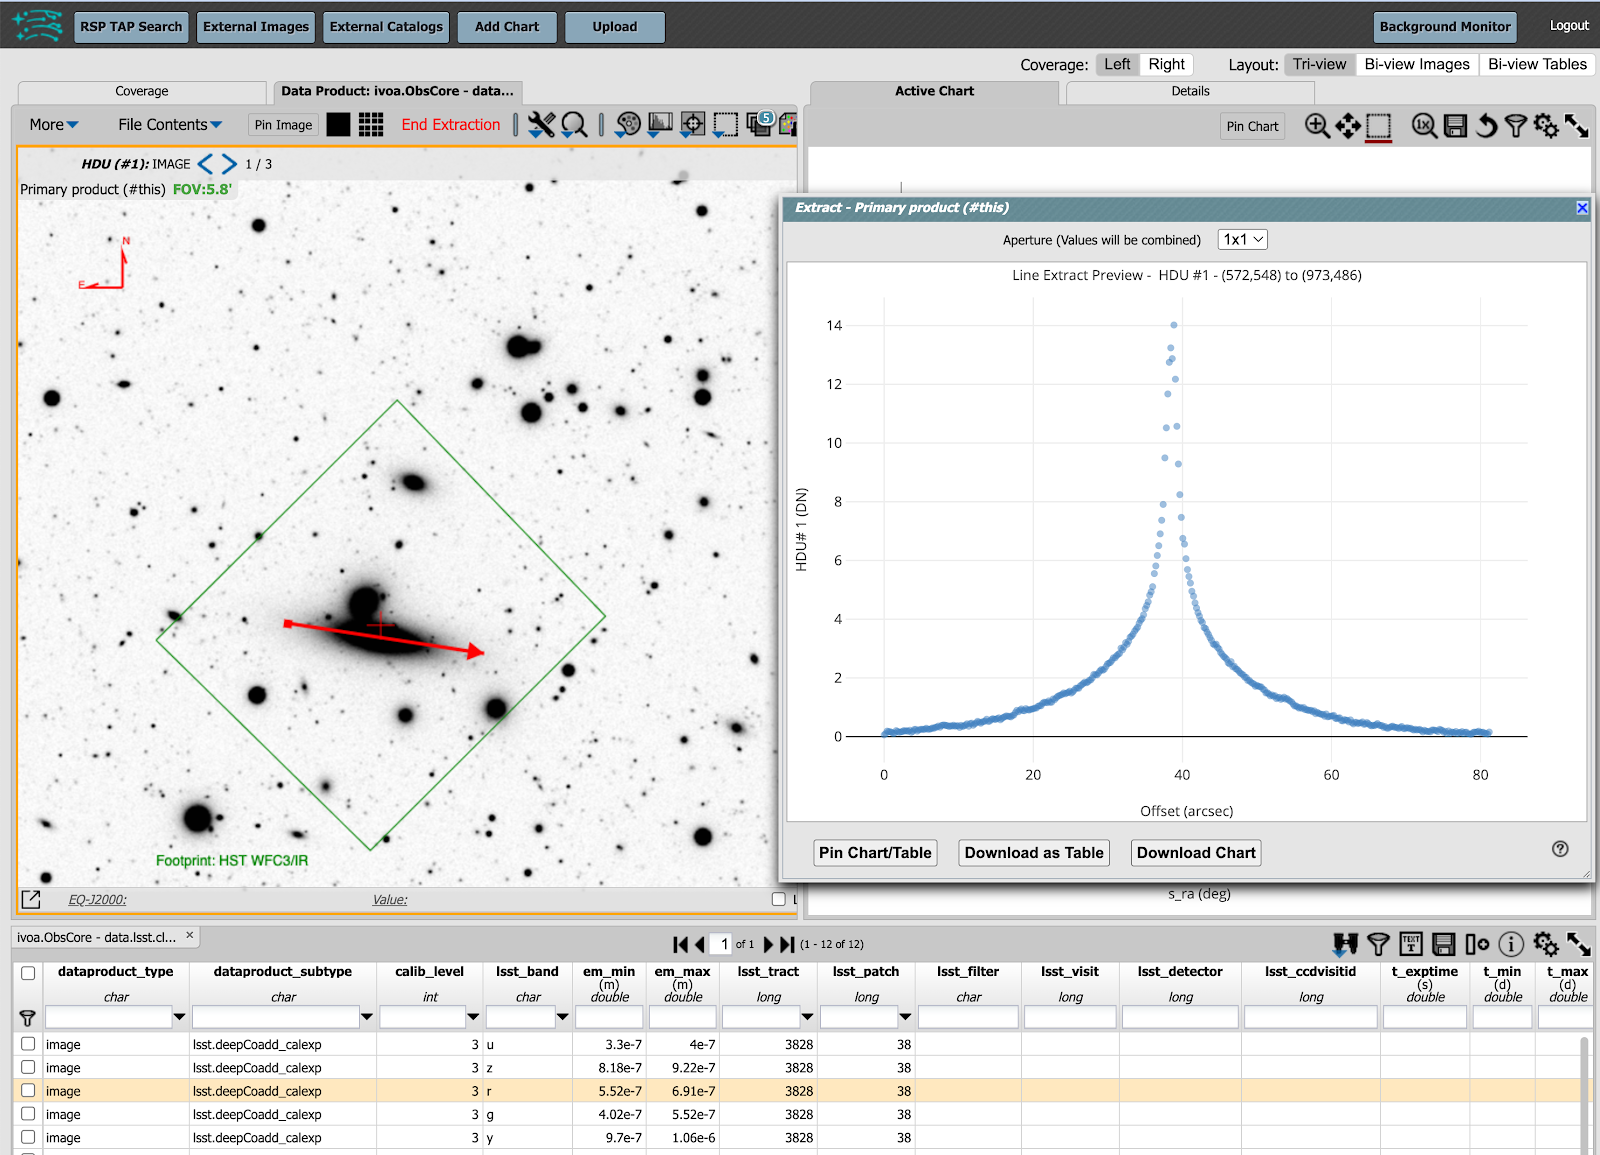 A screenshot of the Portal Aspect of the Rubin Science Platform with three panels, two on top and one at the bottom. The top left panel displays the image of a galaxy from the DC2 simulation in the `r` band. There is a red compass in the upper-left part of the panel, displaying the cardinal directions. The footprint of the Hubble Space Telescope Wide Field Camera 3 - Infrared channel (WFC3/IR) is overlayed as a square, and an extraction line crosses the galaxy from left to right. The top-right panel shows a two-dimensional plot of flux in ADU vs offset in arcseconds, corresponding to the light profile extracted from the galaxy by the line in the top-left panel. The bottom panel shows a table with different objects from the image.